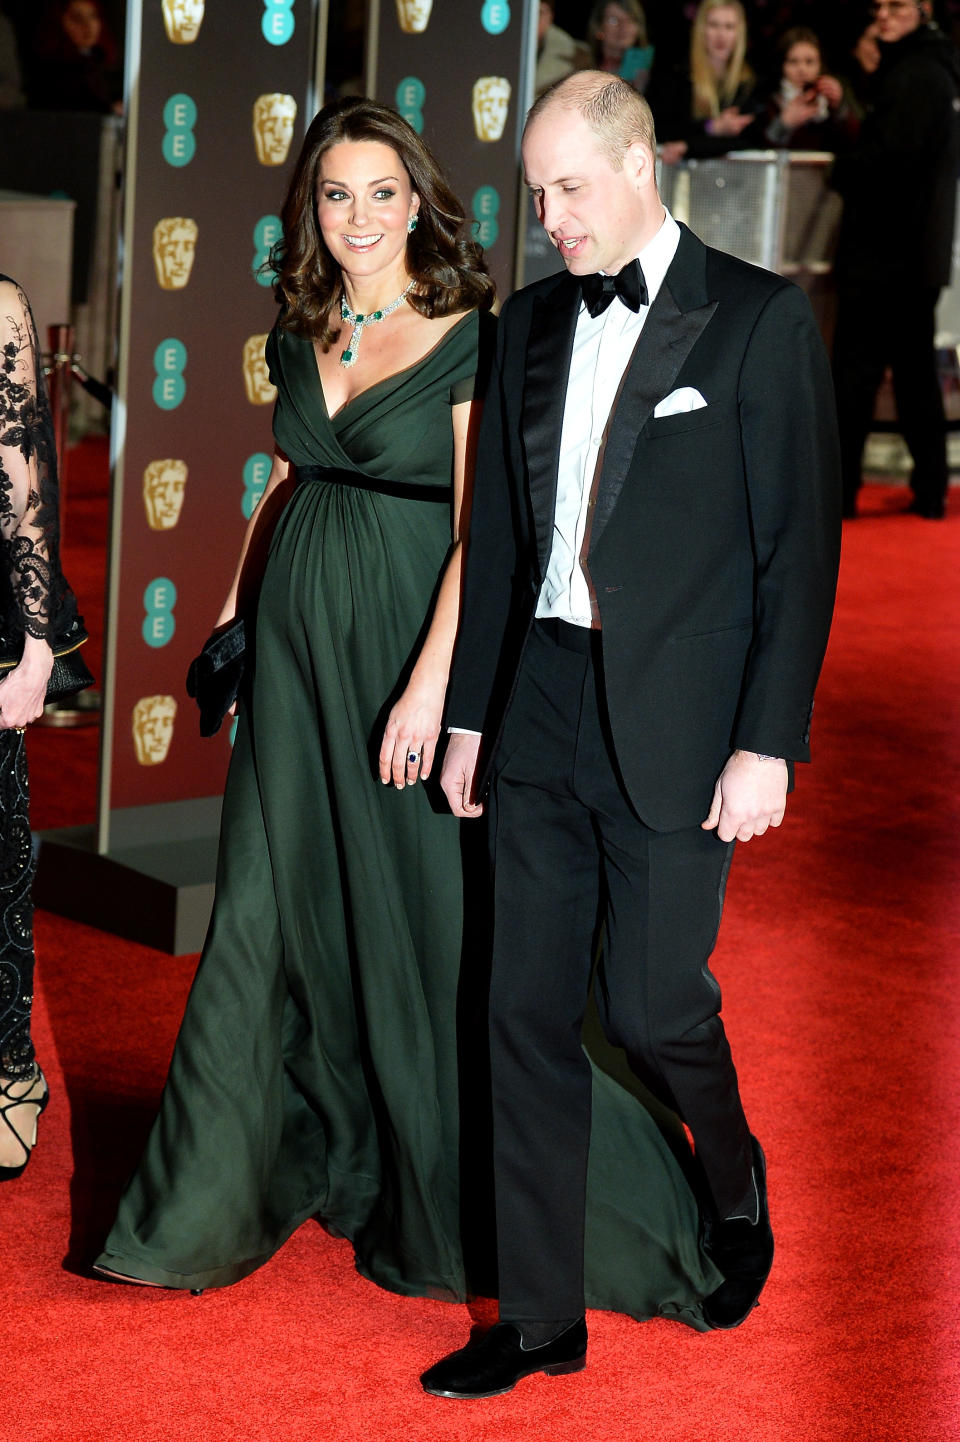 Duke and Duchess of Cambridge at the BAFTA Awards in London in 2018